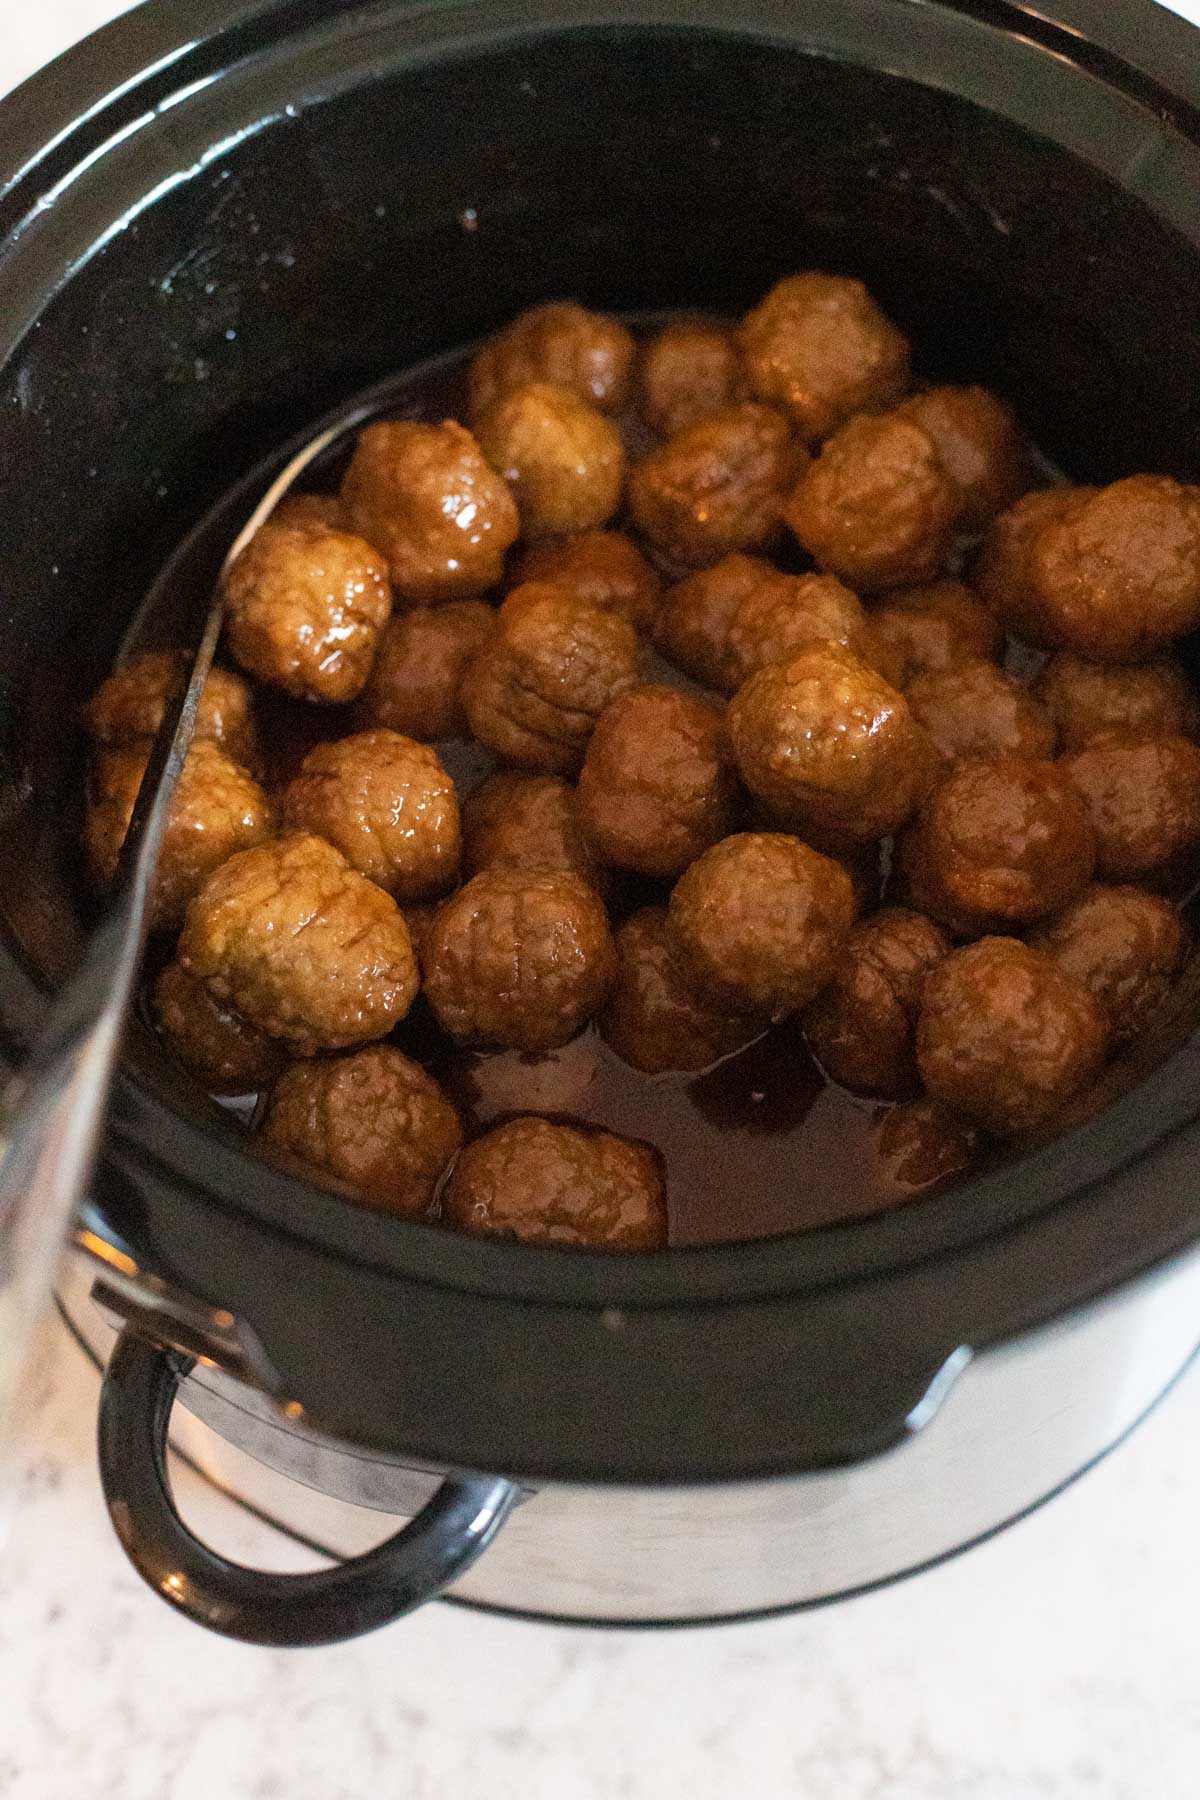 The cooked meatballs are ready for serving.